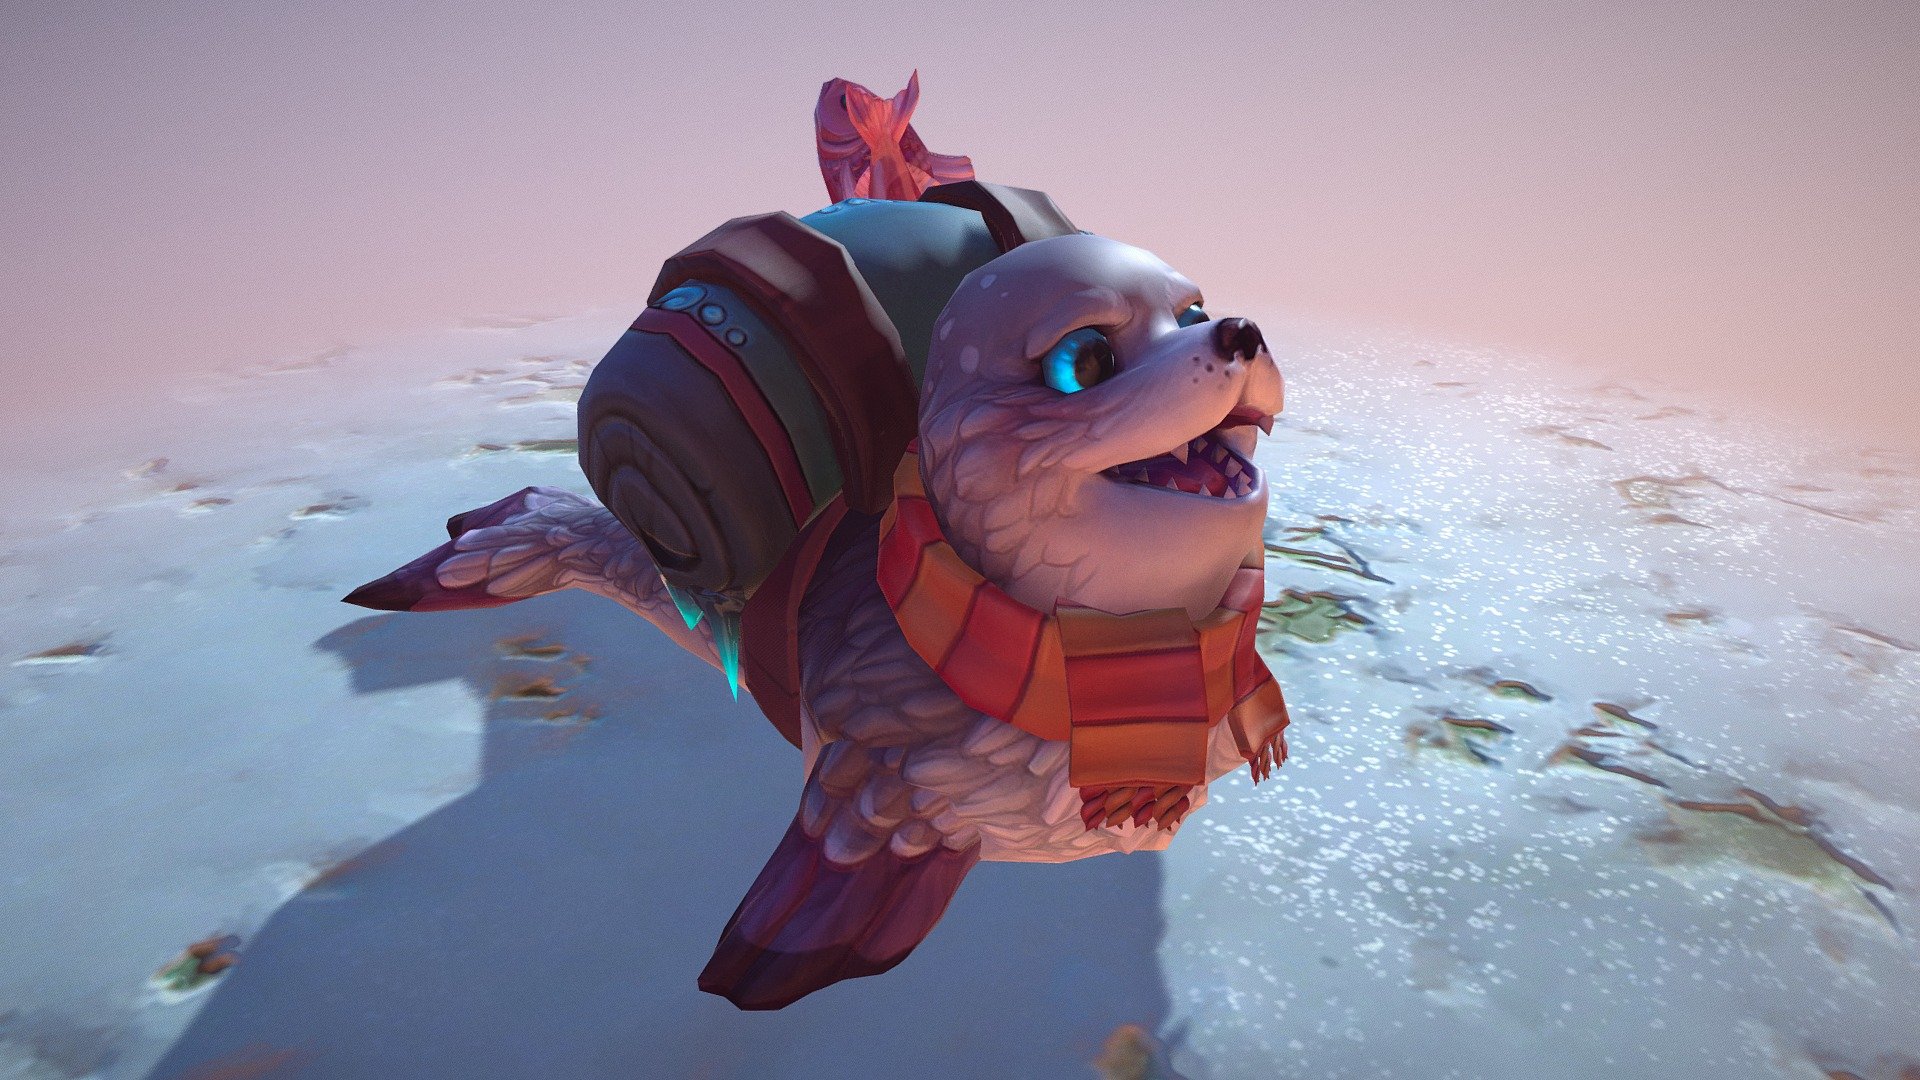 Courier for Dota 2 created by Shaylyn Hamm and myself. I did rigging &amp; animation, she did modeling &amp; texturing. It was accepted by Valve and put for sale in the first Frostivus 2018 treasure!  Don't forget to check out the animation list, there's a handful in there! For reference, most of these are always seen from a top-down perspective, at 30-ish degrees.

This is a rework of the initial submission from a year ago. A lot of things were updated: the design was changed, the materials significantly upgraded, and the animations were not only modified to account for the model changes, but also polished; I also used the opportunity to add a new flying idle rare animation.

The animations here on Sketchfab differ very slightly from the final in-game version. (Most notably the front flippers in the ground idle.)

The older version can be found here if you wanna try and spot the differences :)

https://sketchfab.com/models/808282cd1bc14a3094f18b25e763ad3e - Serac the Seal (2018) - 3D model by Maxime Lebled (@maximelebled) 3d model